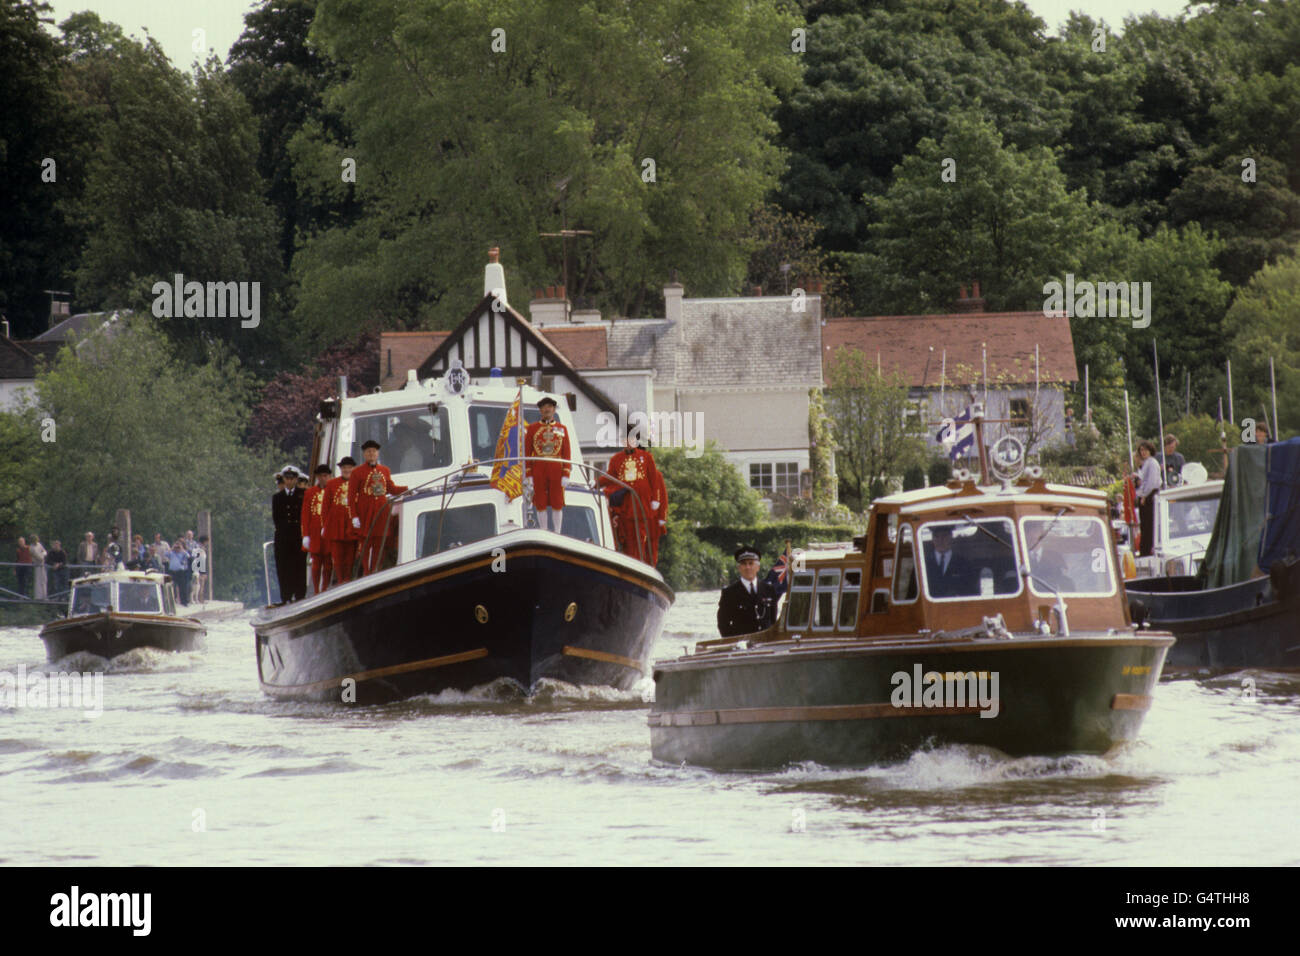 The Royal Barge, 'Royal Nore', arriving at Twickenham with Prince Charles who was attending Twickenham's 900th anniversary celebrations. Stock Photo